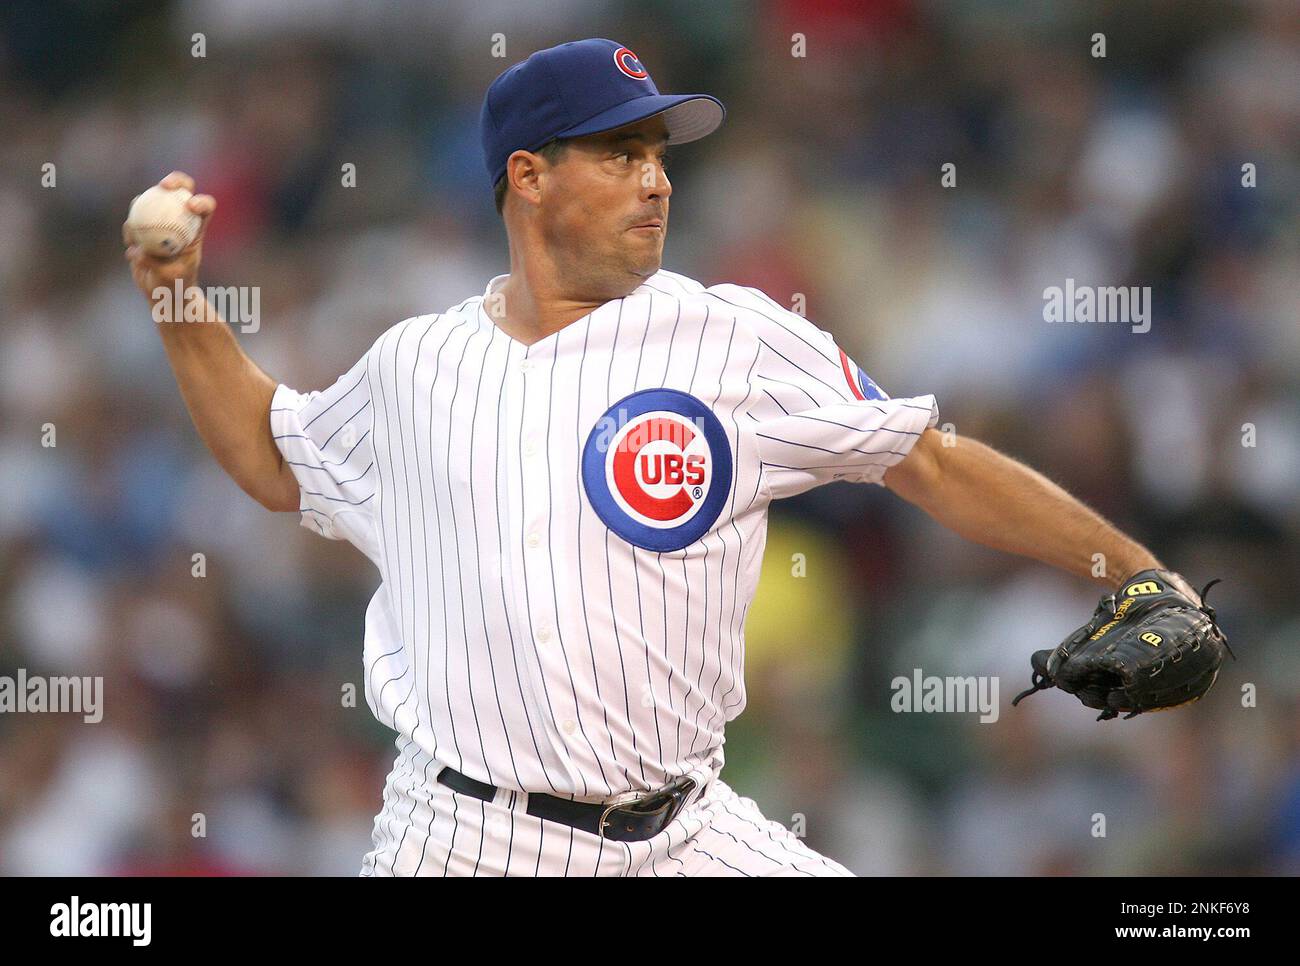 Chicago, USA. 30th May, 2006. Chicago Cubs pitcher Greg Maddux works against the Cincinnati Reds at Wrigley Field on May 30, 2006, in Chicago. (Photo by Nuccio DiNuzzo/Chicago Tribune/TNS/Sipa USA) Credit: Sipa USA/Alamy Live News Stock Photo